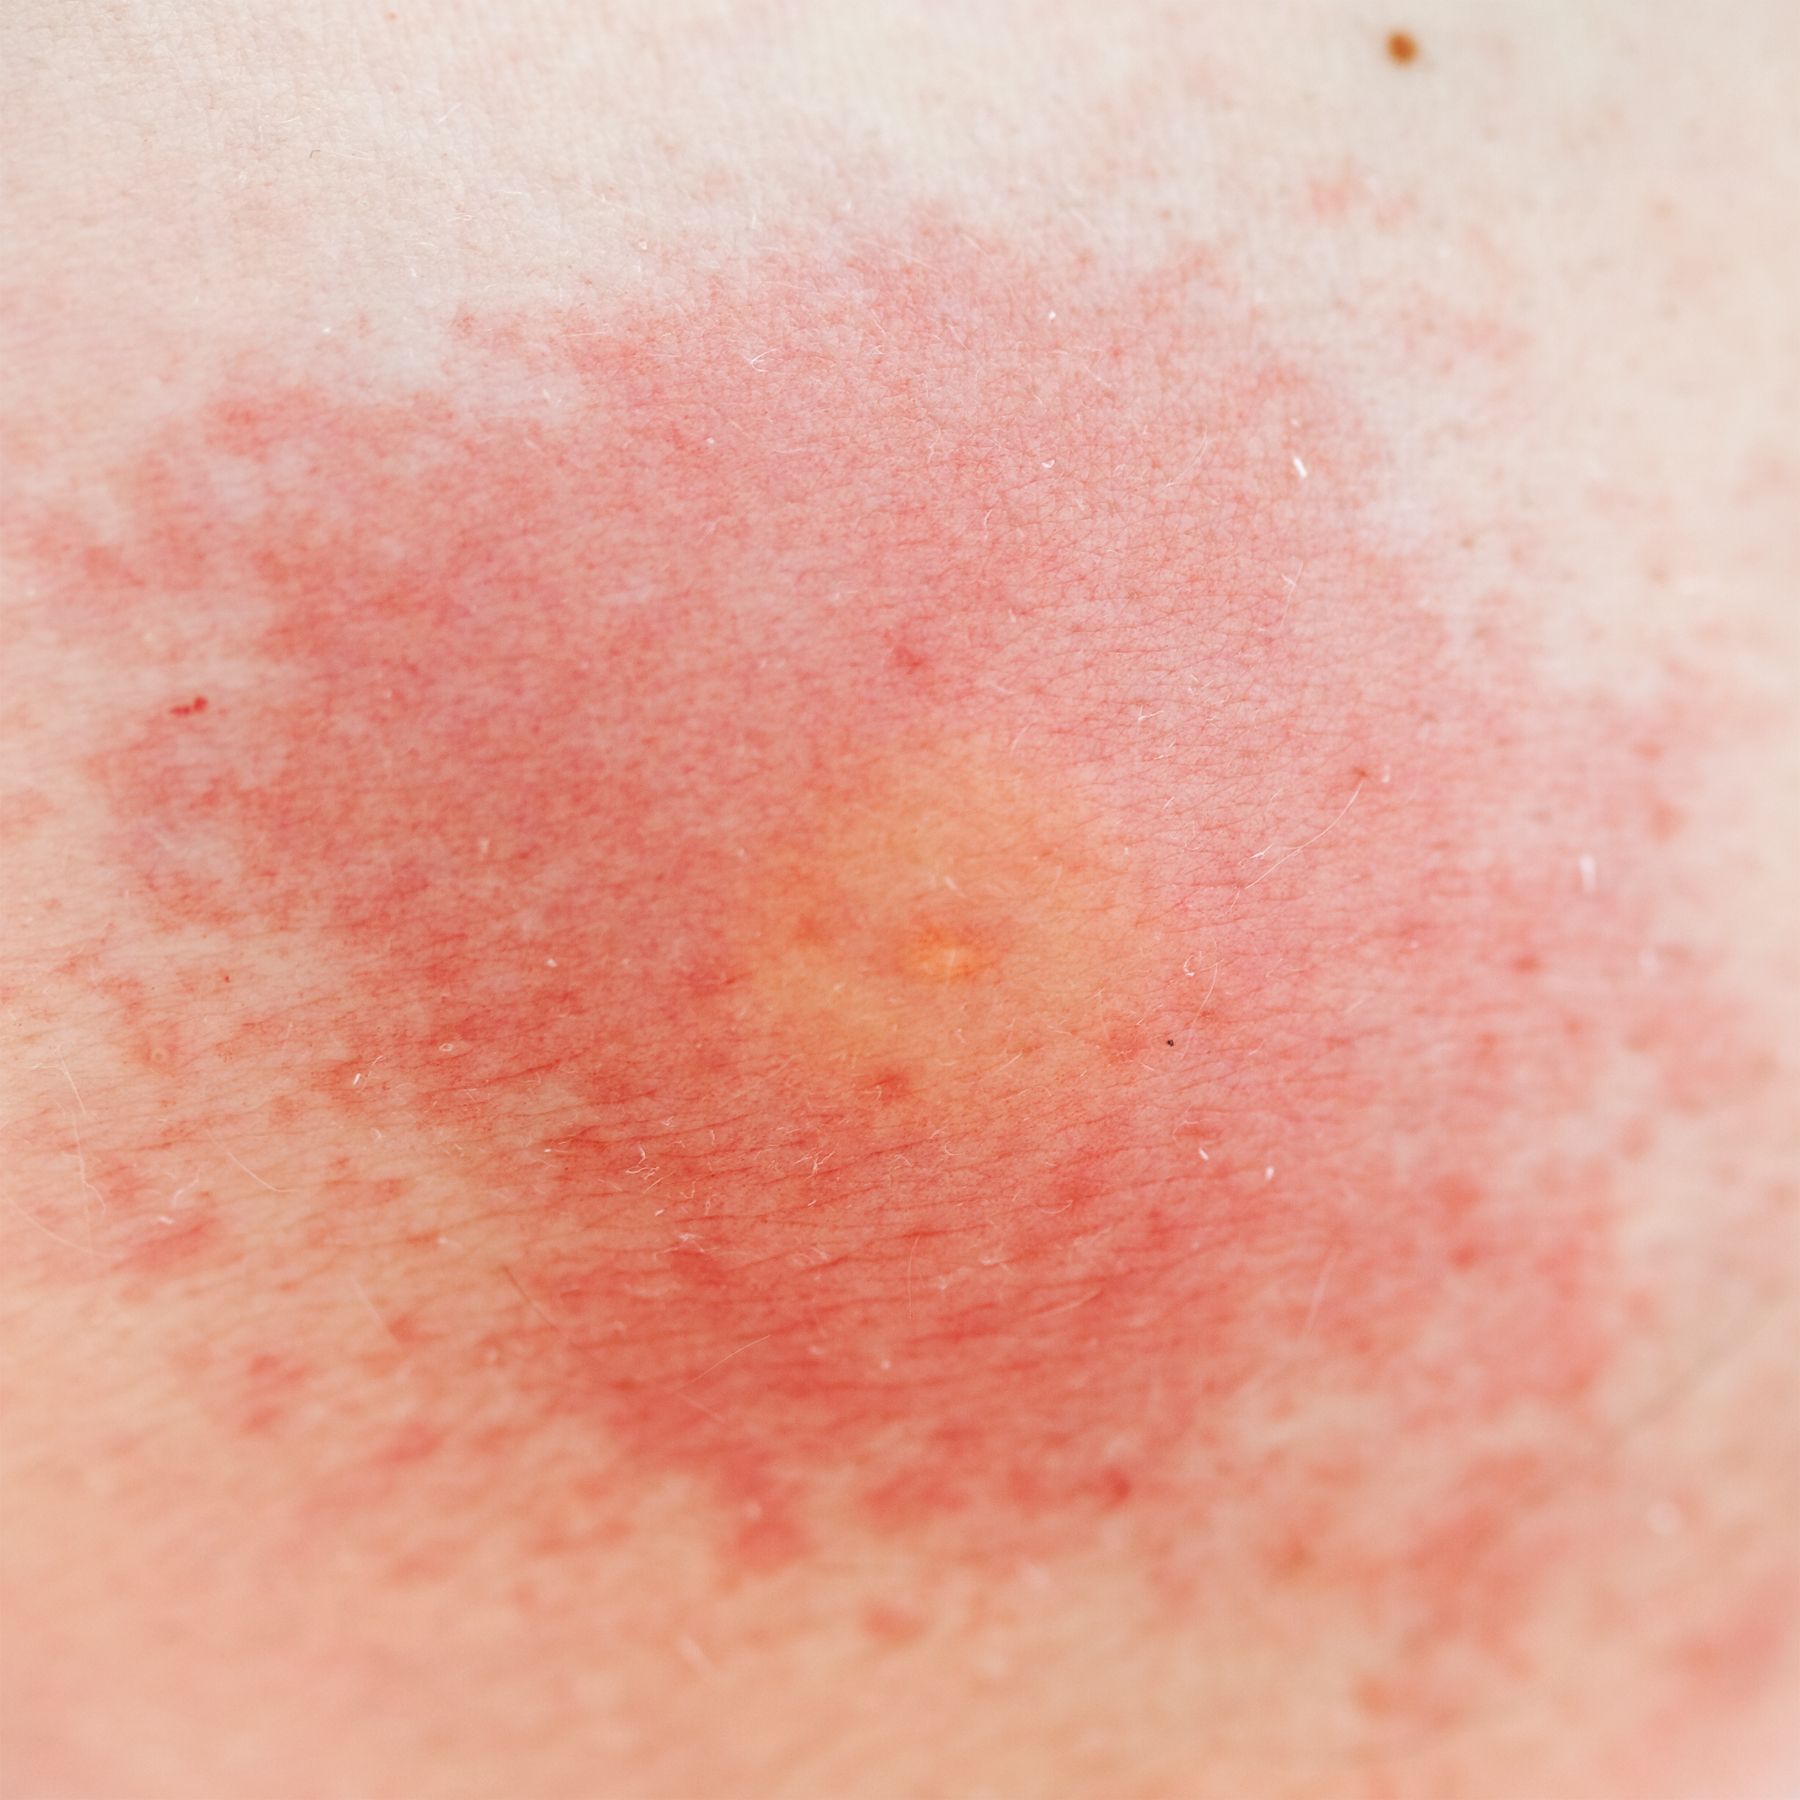 Allergy Rash On Skin Leg Caused By Bug Bites From Topical Beach Sand Stock  Photo - Download Image Now - iStock